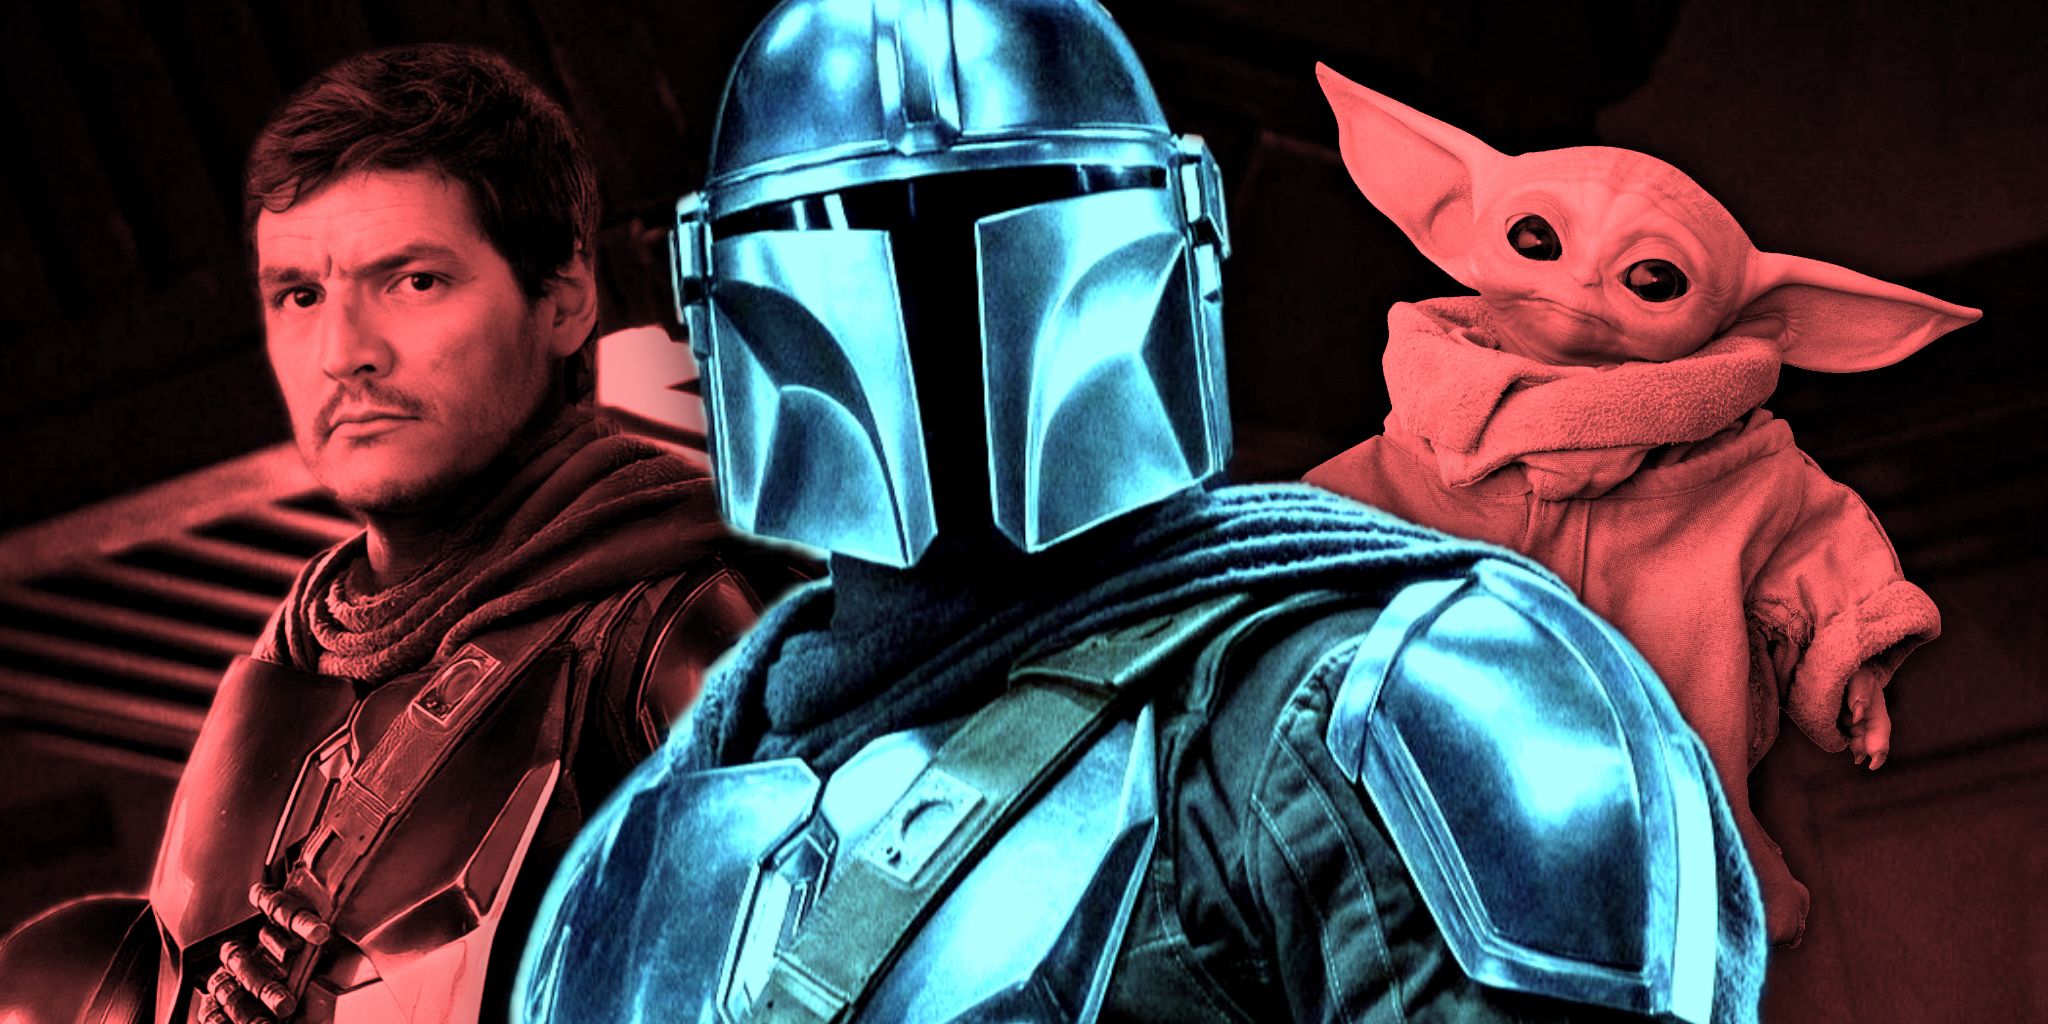 10 Quotes That Prove The Mandalorian’s Din Djarin Is Star Wars’ Most Honorable Hero